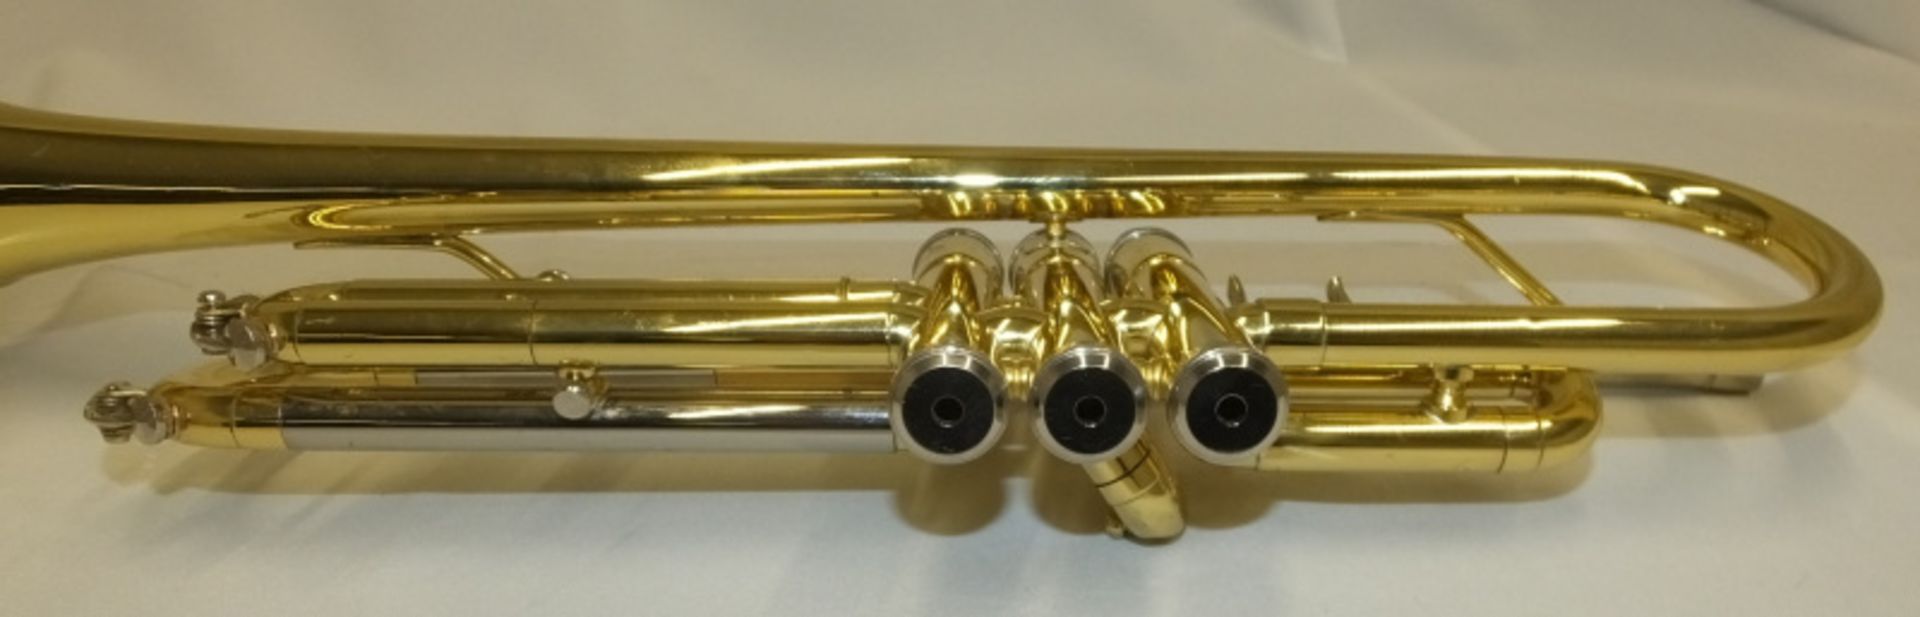 Yamaha YTR 2320E Trumpet in case - serial number 313803 - Please check photos carefully - Image 7 of 12